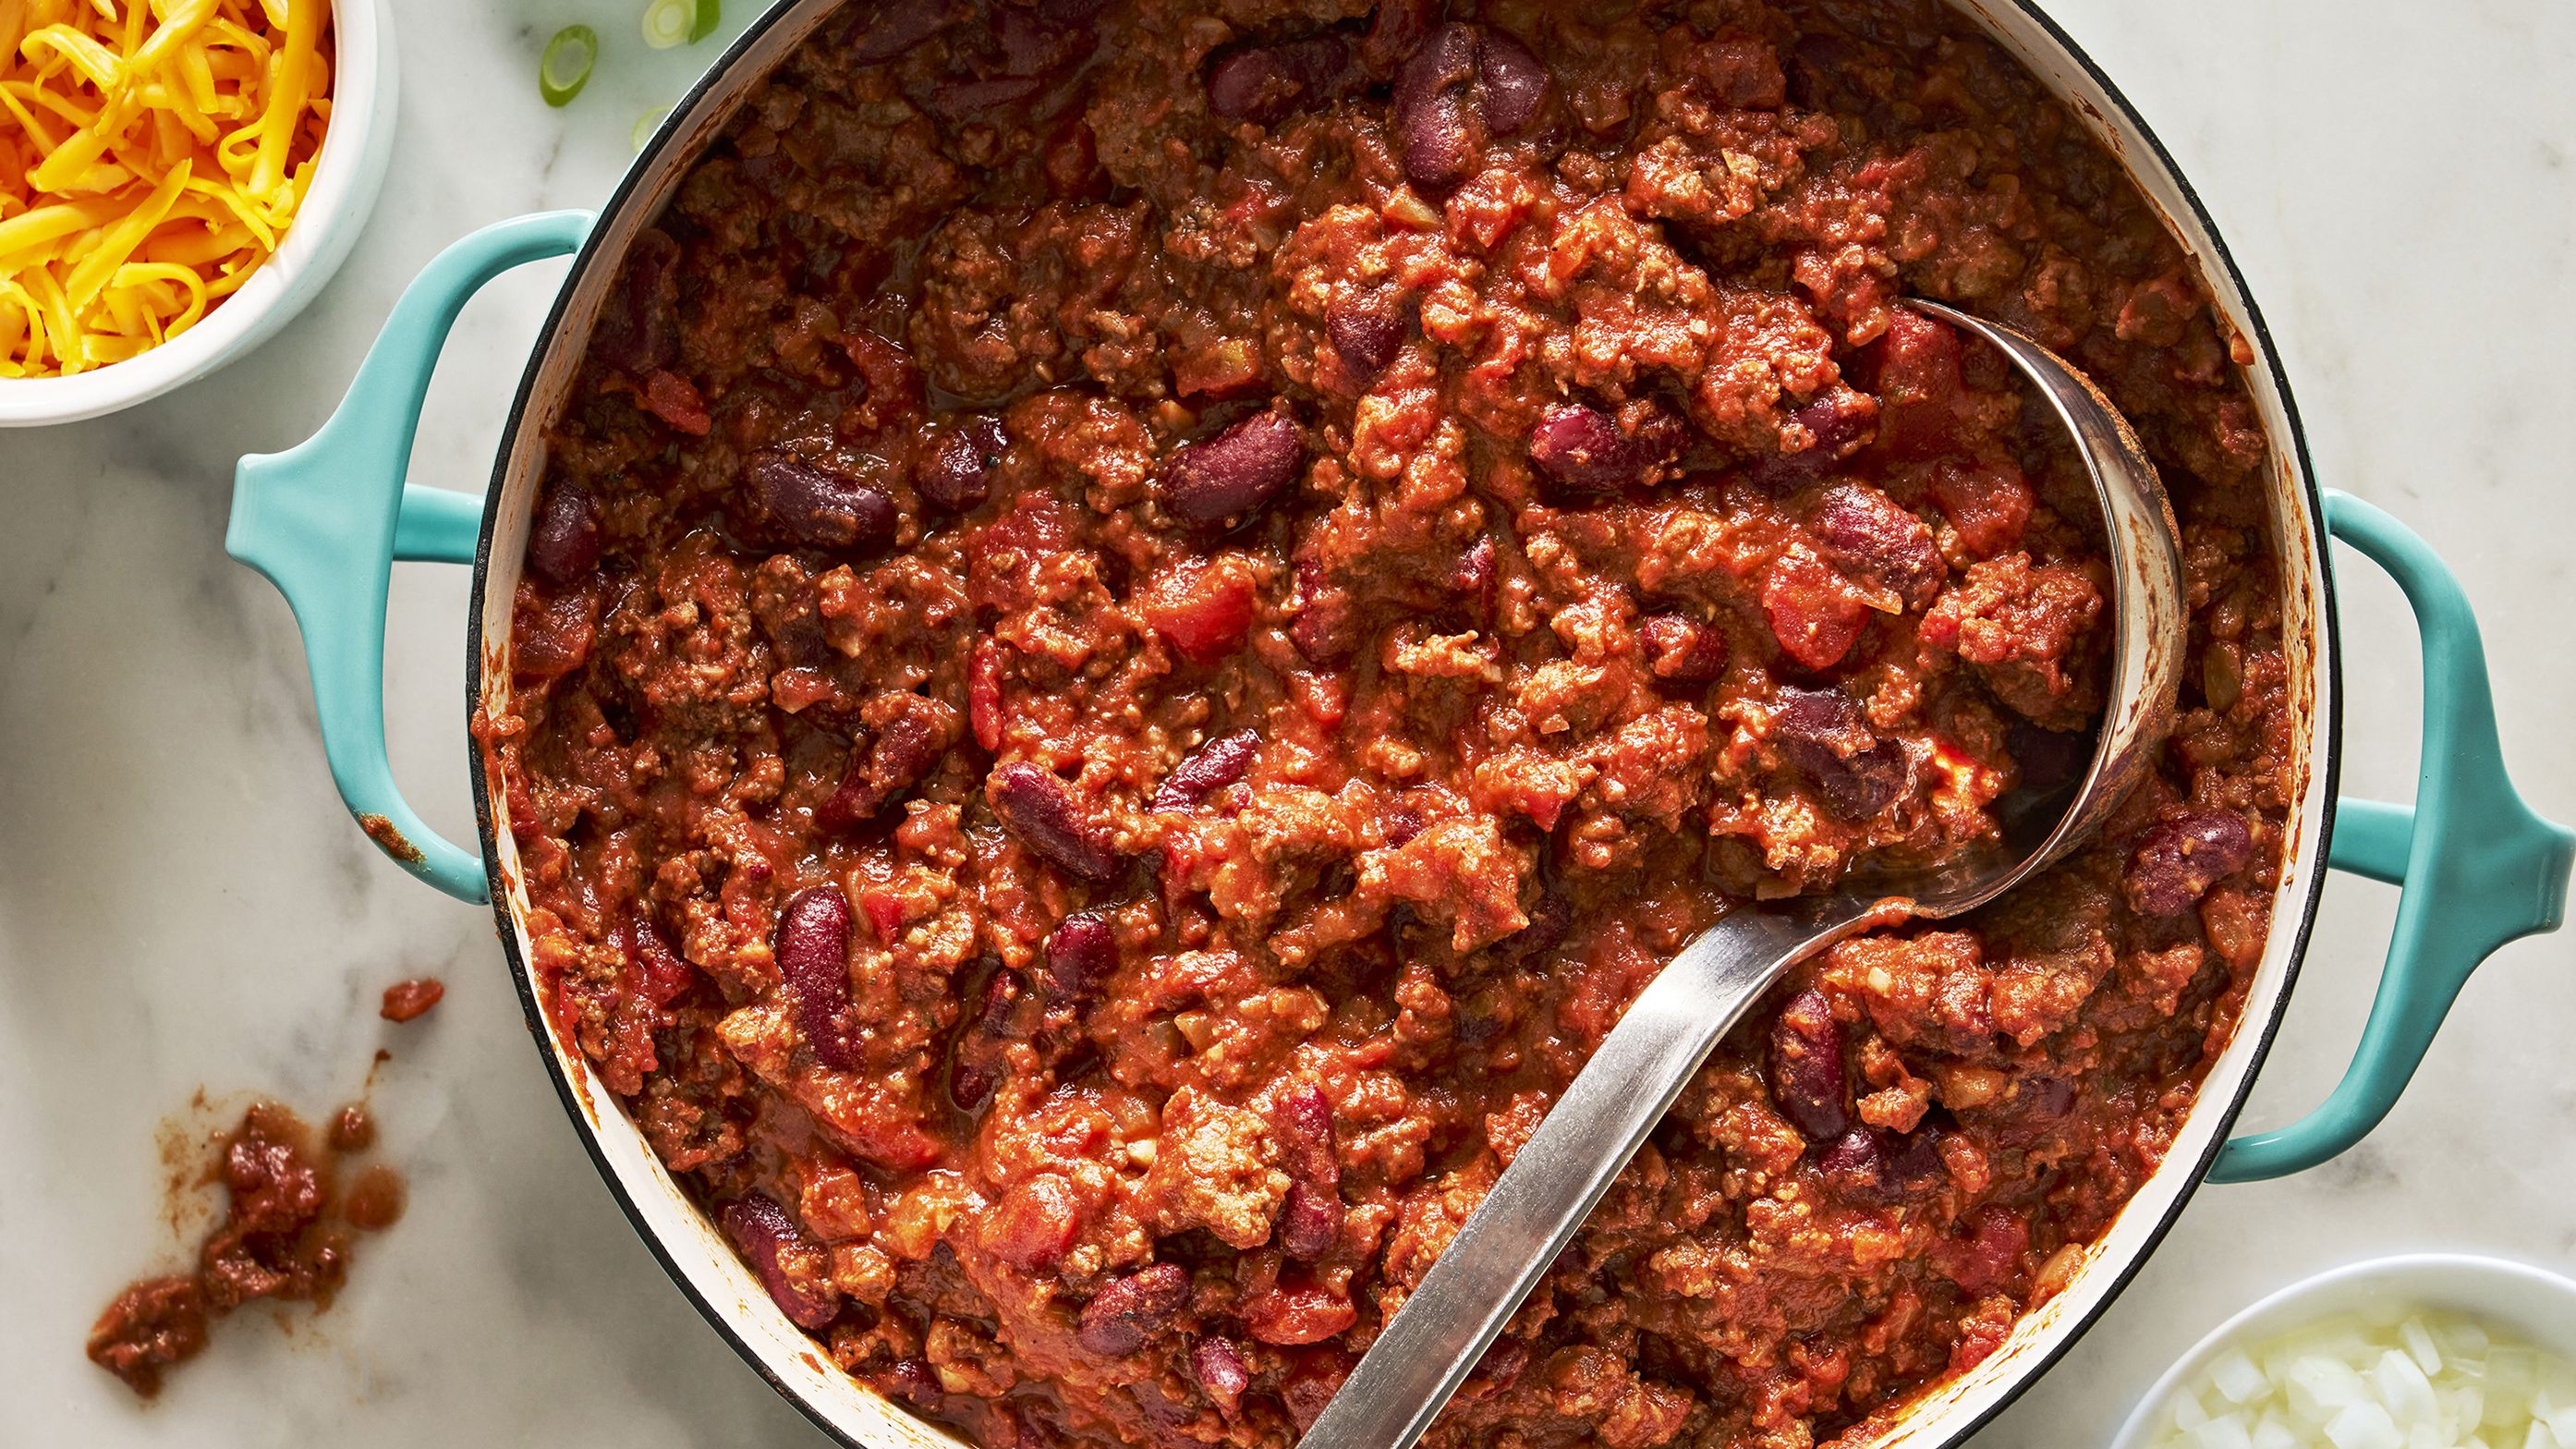 https://hips.hearstapps.com/hmg-prod/images/best-ever-beef-chili-index-1677260488.jpg?crop=0.8903083856772774xw:1xh;center,top